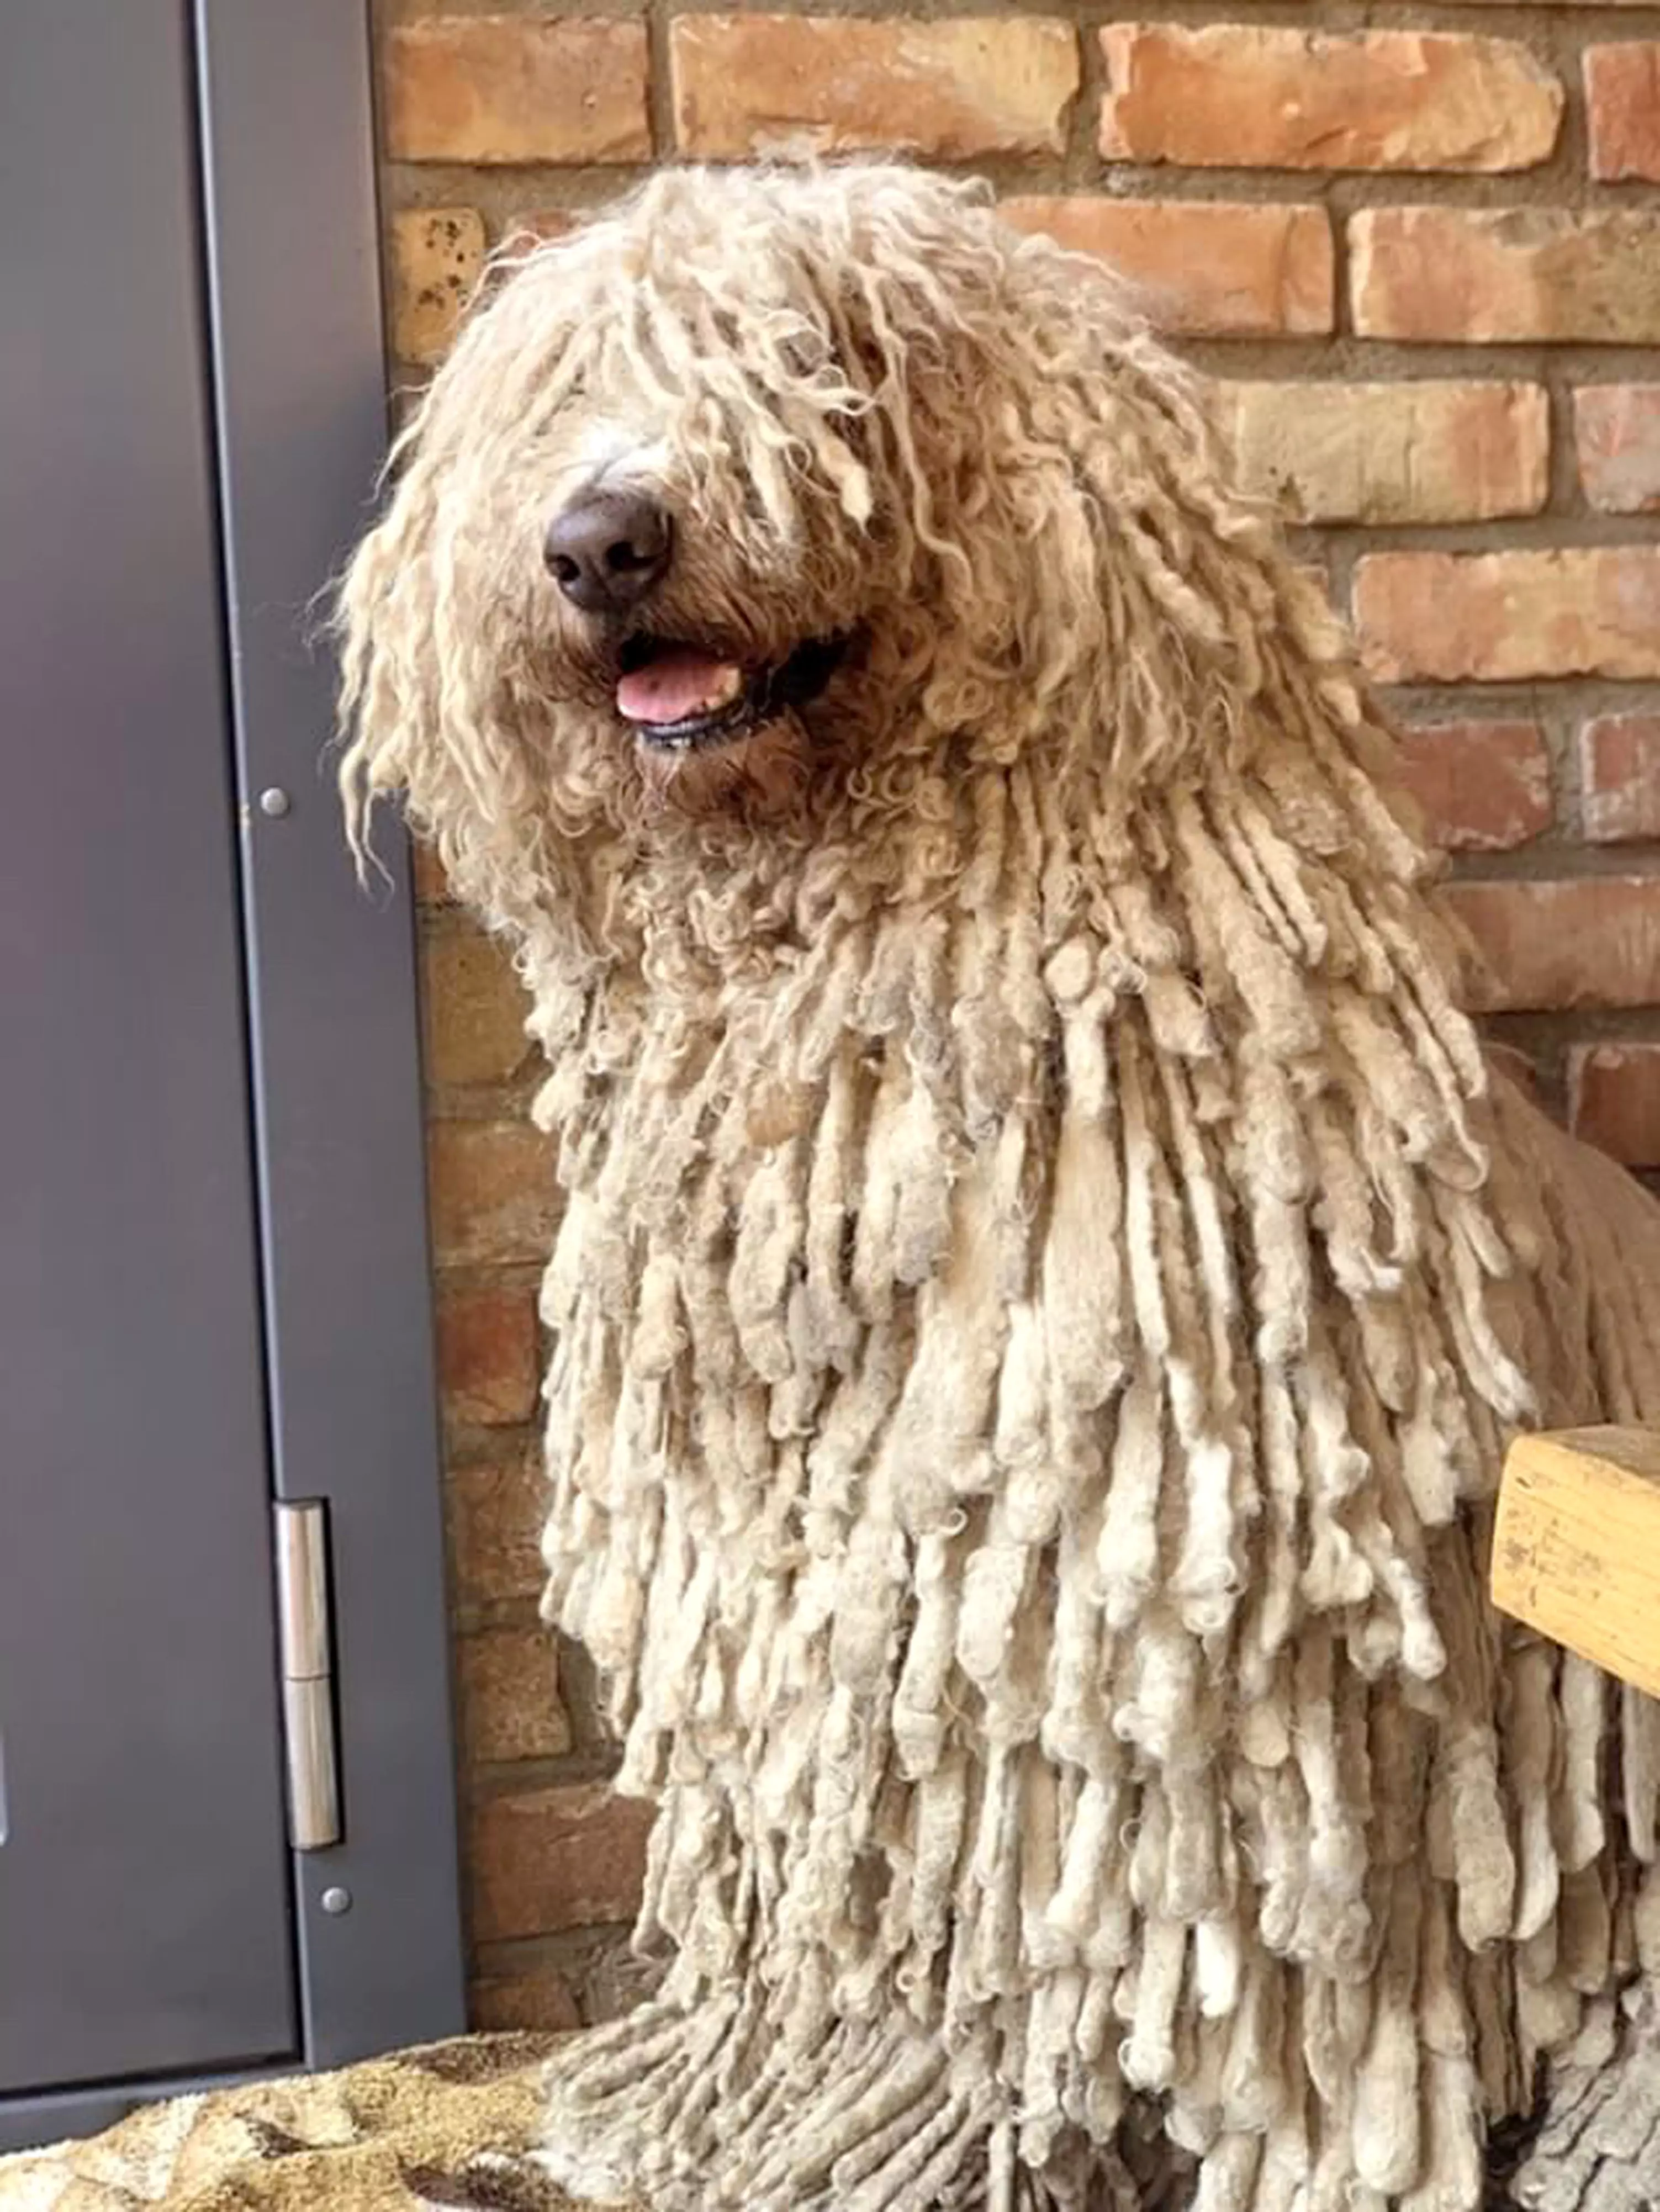 A Hungarian sheepdog has taken the internet by storm after people likened the cute canine to a mop (